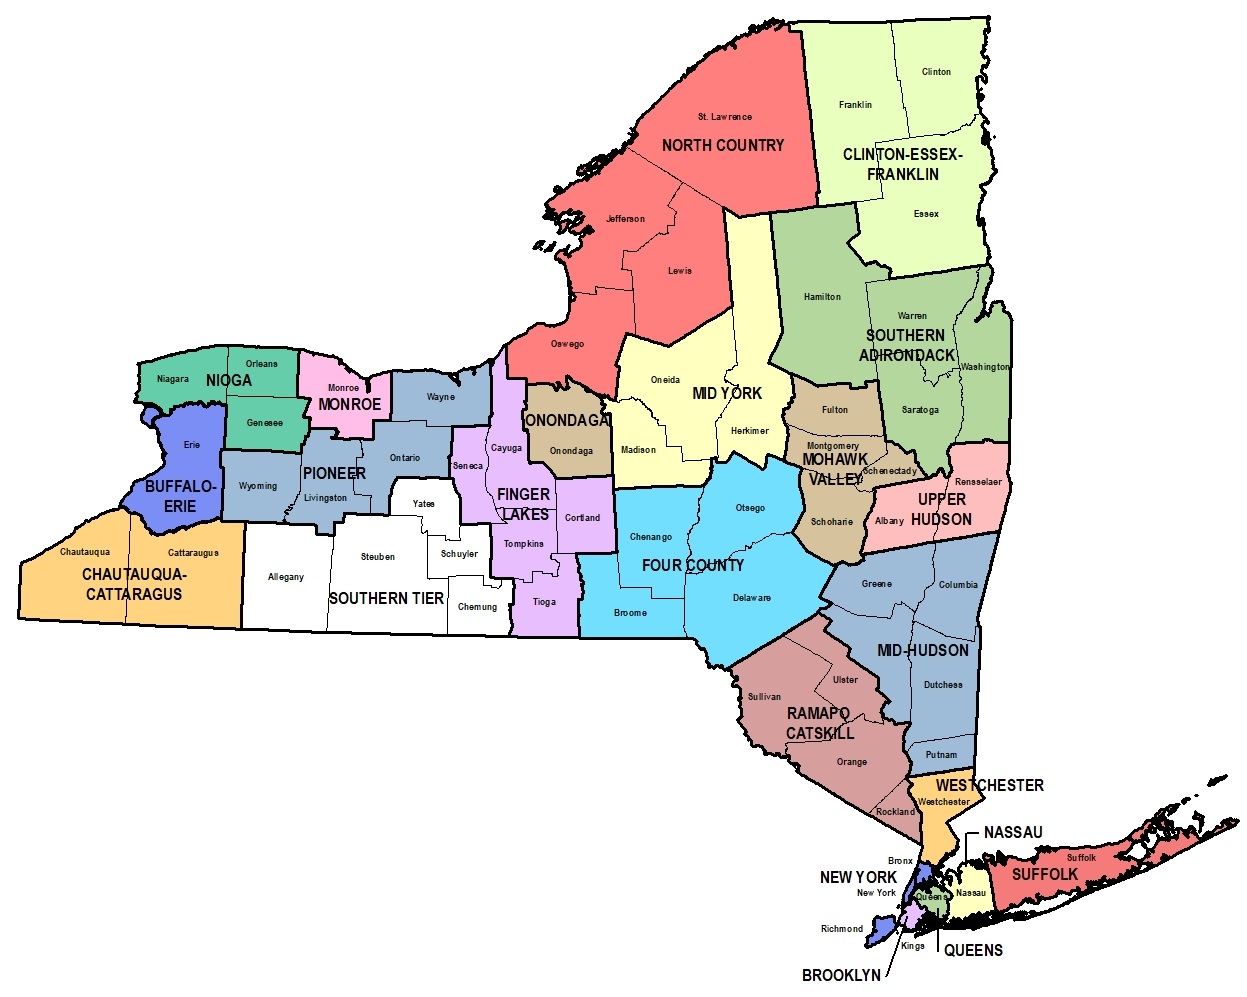 Public Library Service Area Maps: Division of Library Development: NYS